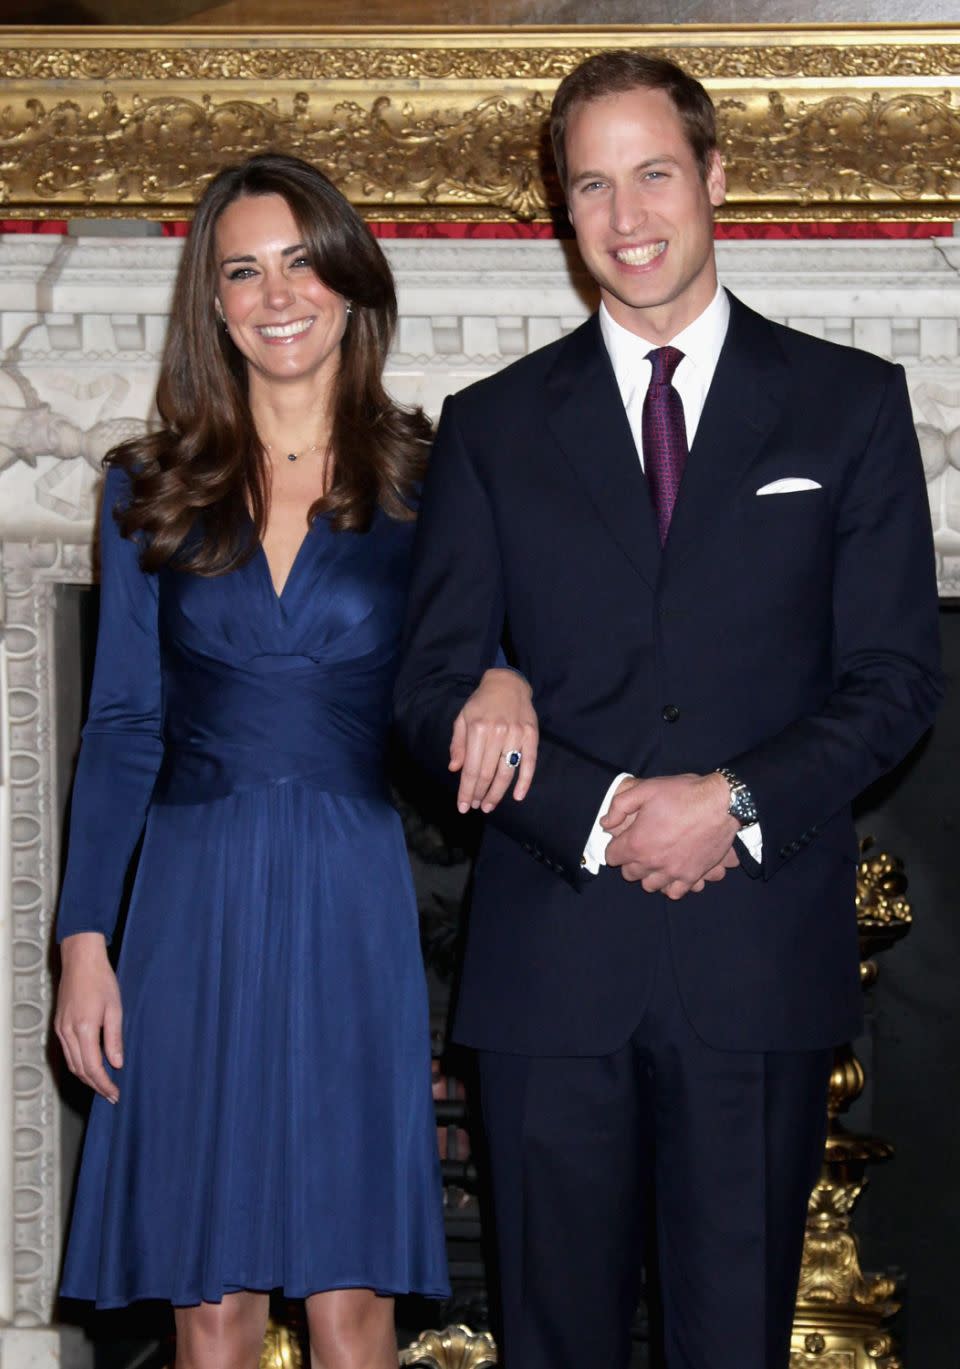 Kate and William announced their engagement in 2010, eventually marrying in 2011. Source: Getty